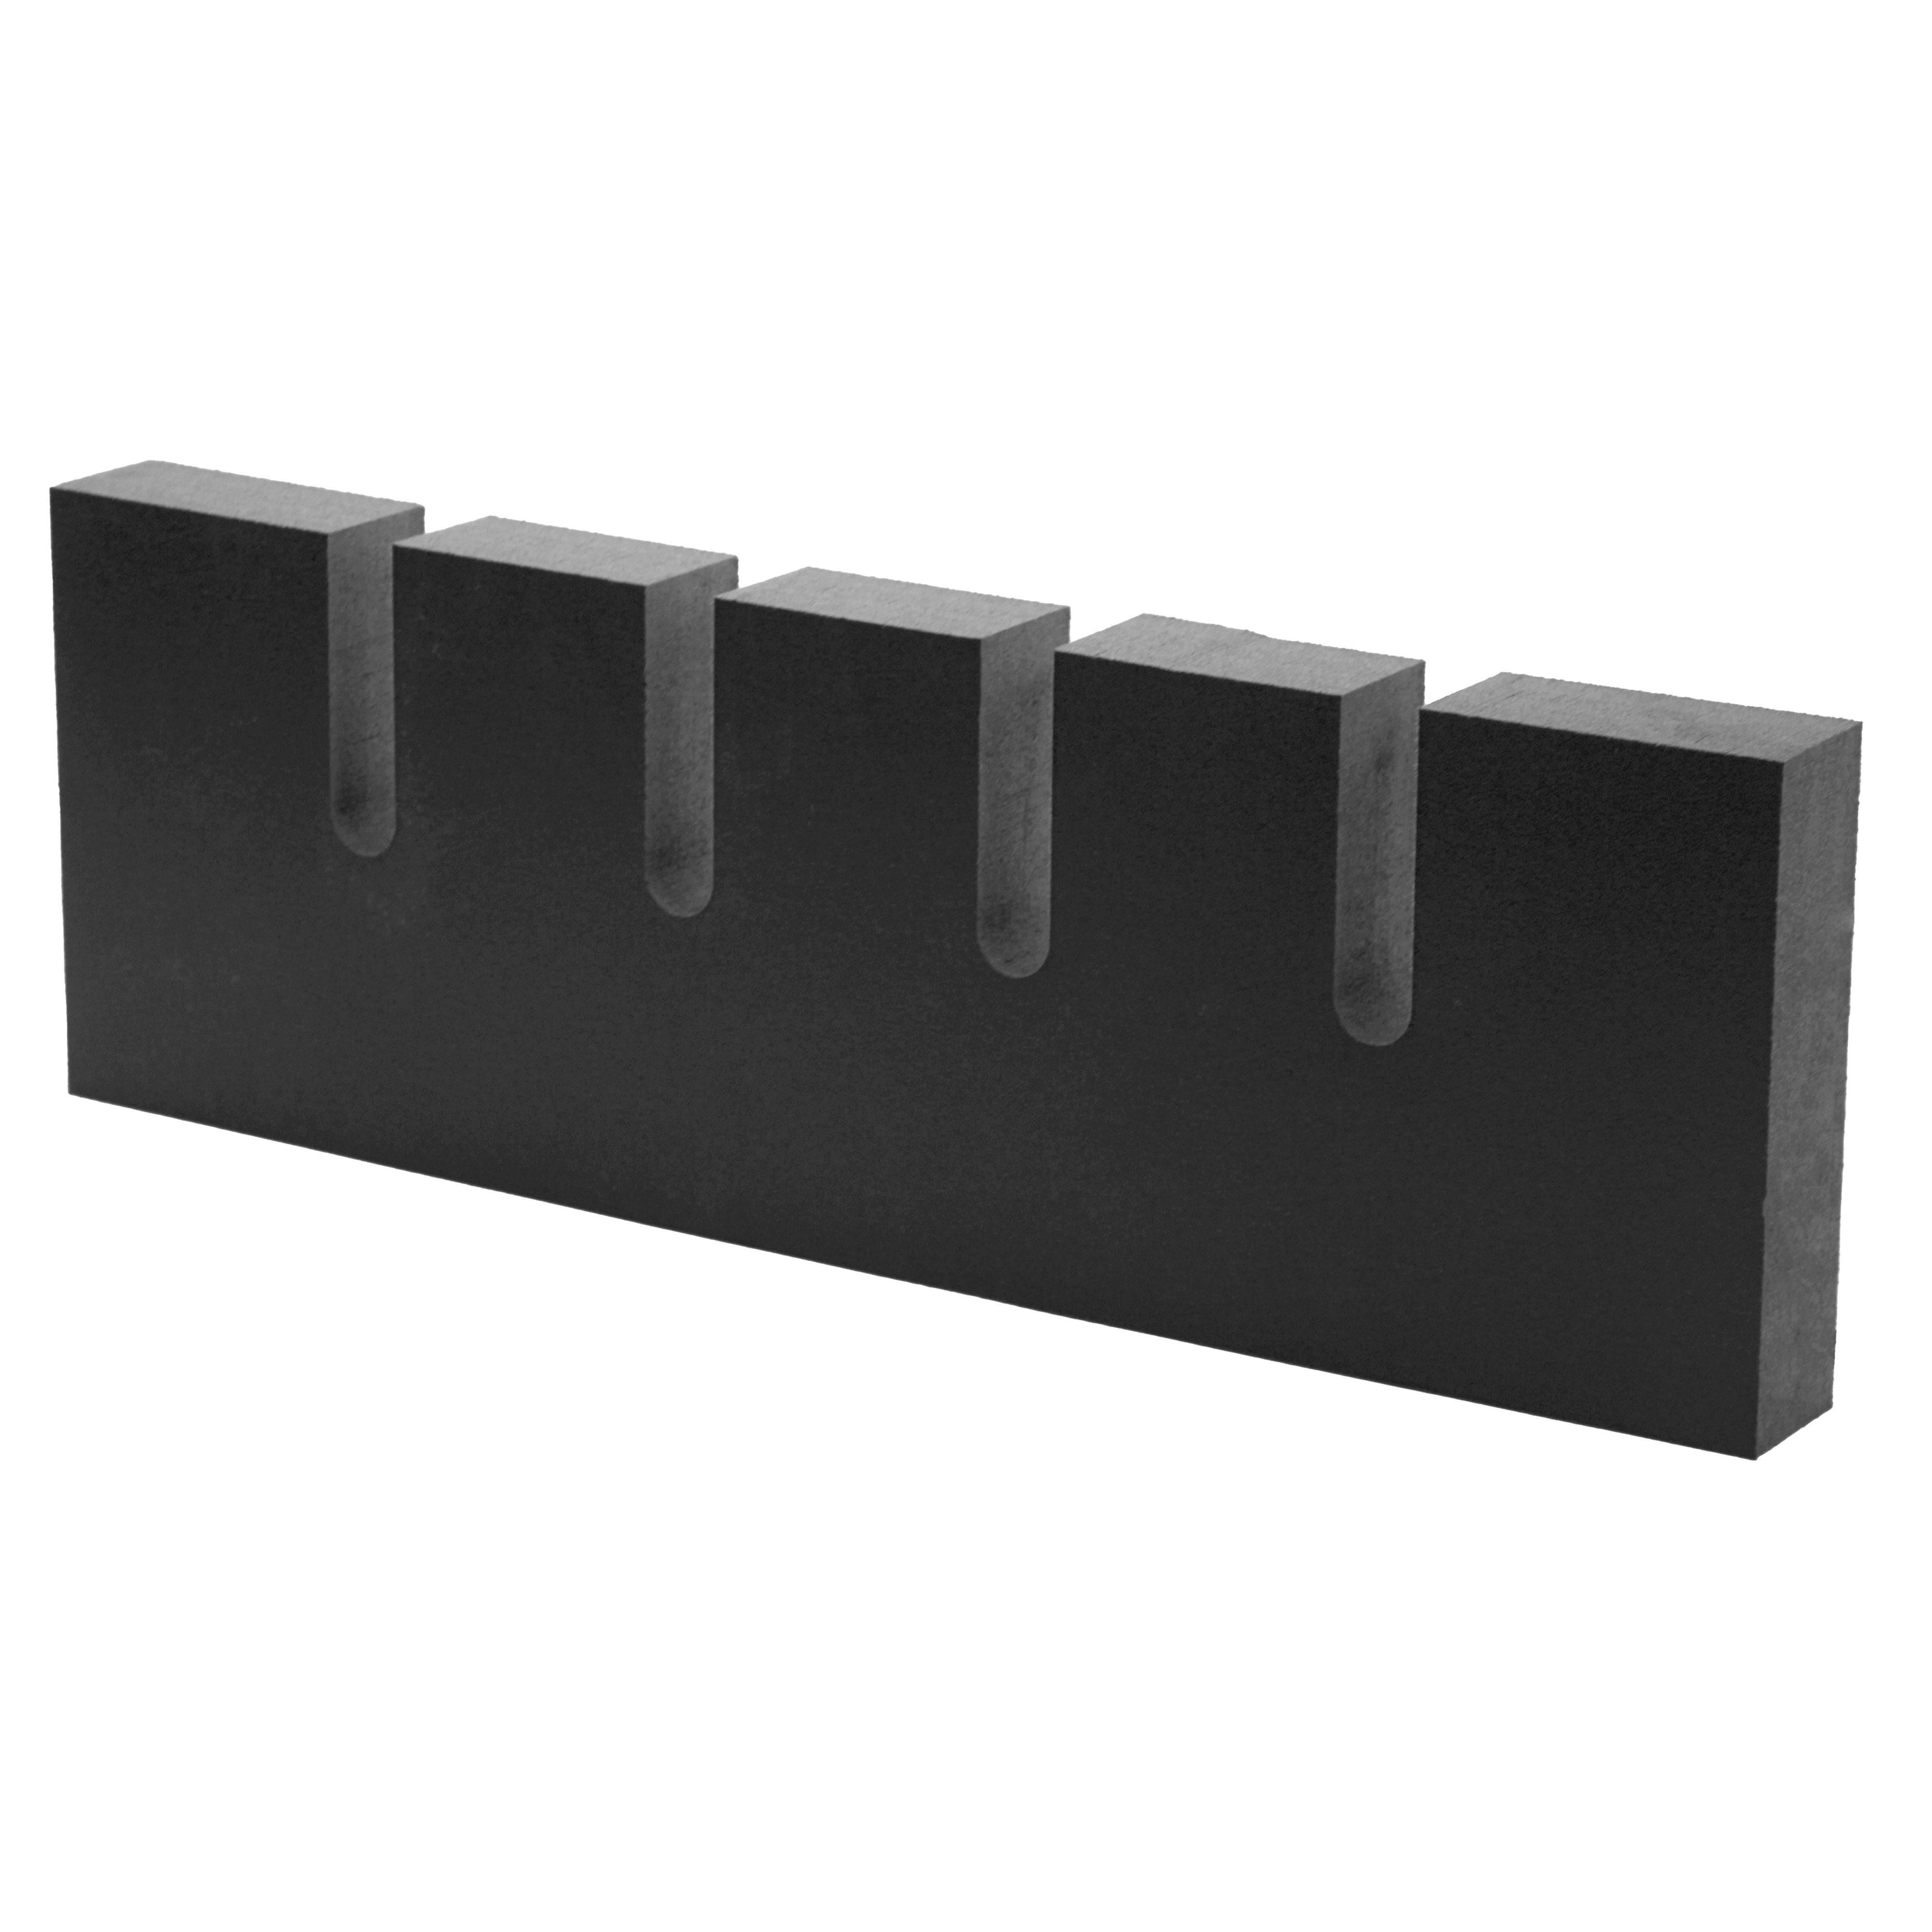 Heavy Duty Foam Dunnage Reusable Cushion for Shipping Box Crate Straight Slot 24x8x2 1 Pack